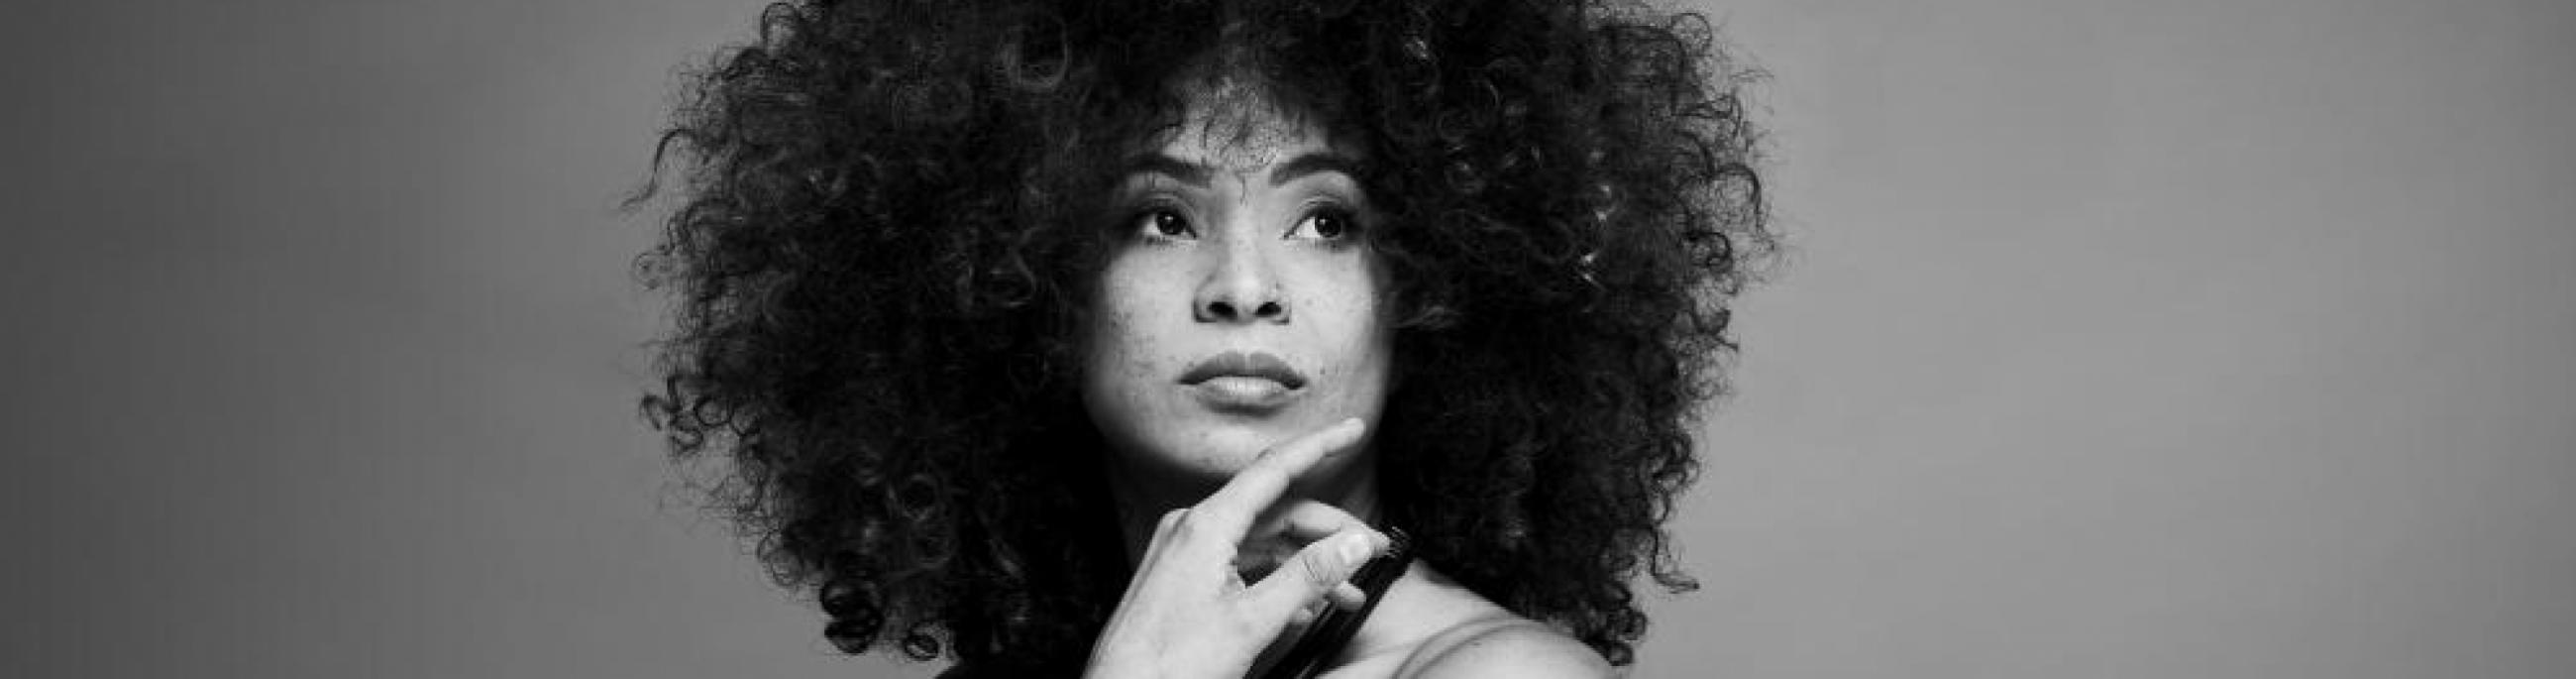 In this black-and-white photo, singer Kandace Springs rests her chin on her hand and looks off into the distance.